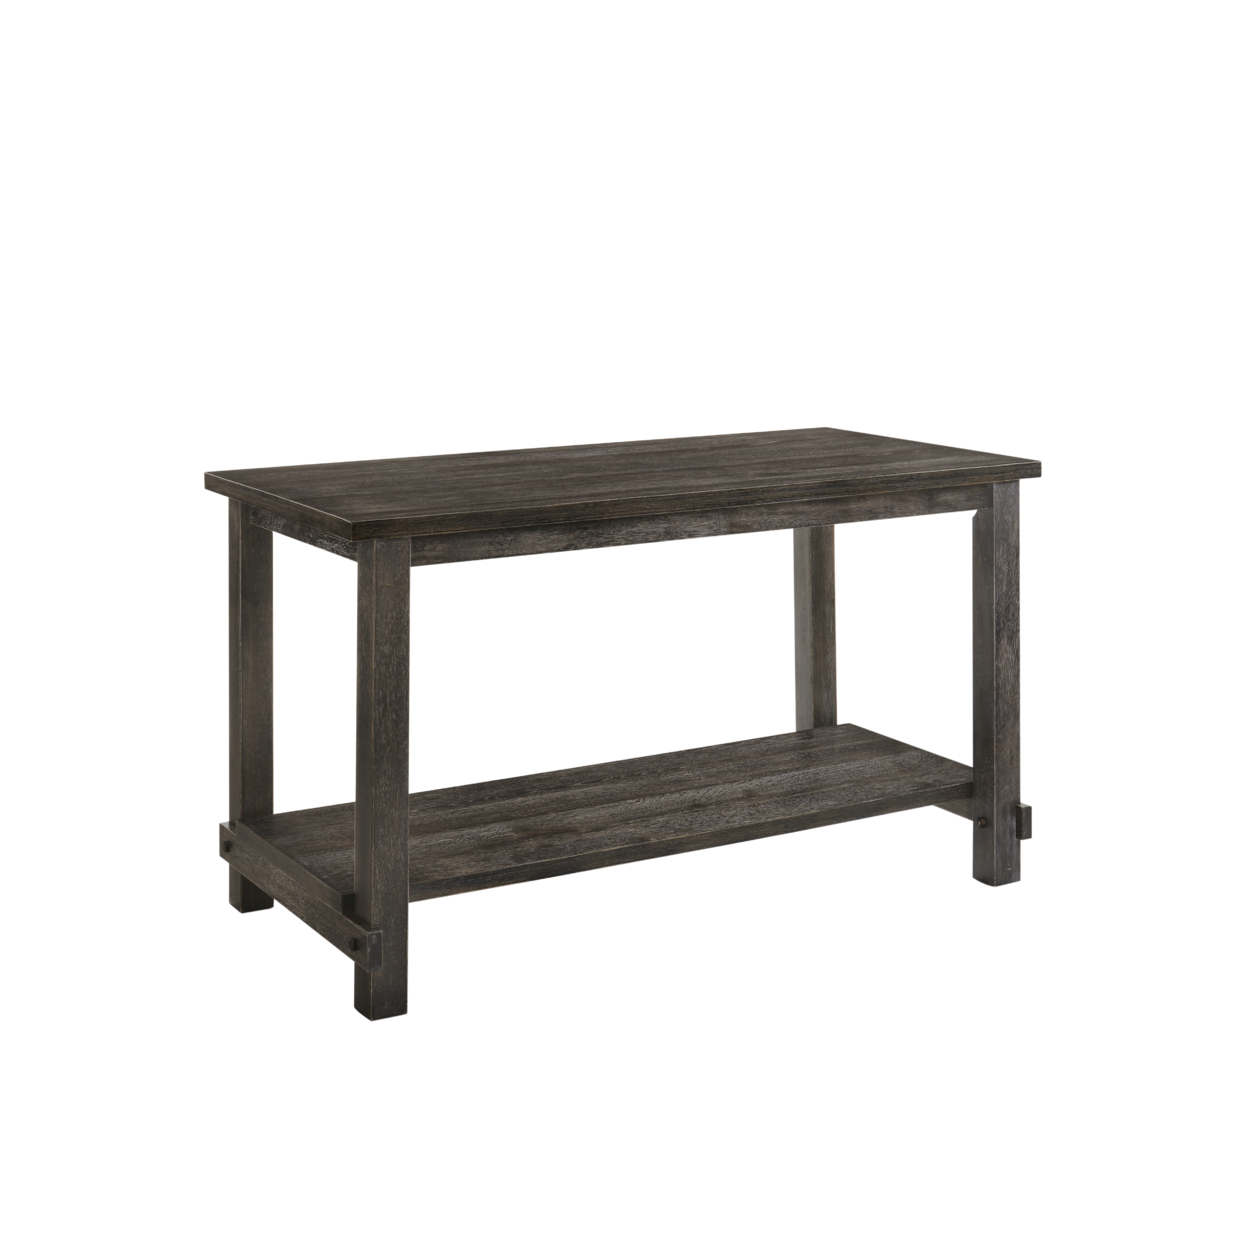 Counter Height Wooden Dining Table With Open Bottom Shelf, Gray- Saltoro Sherpi